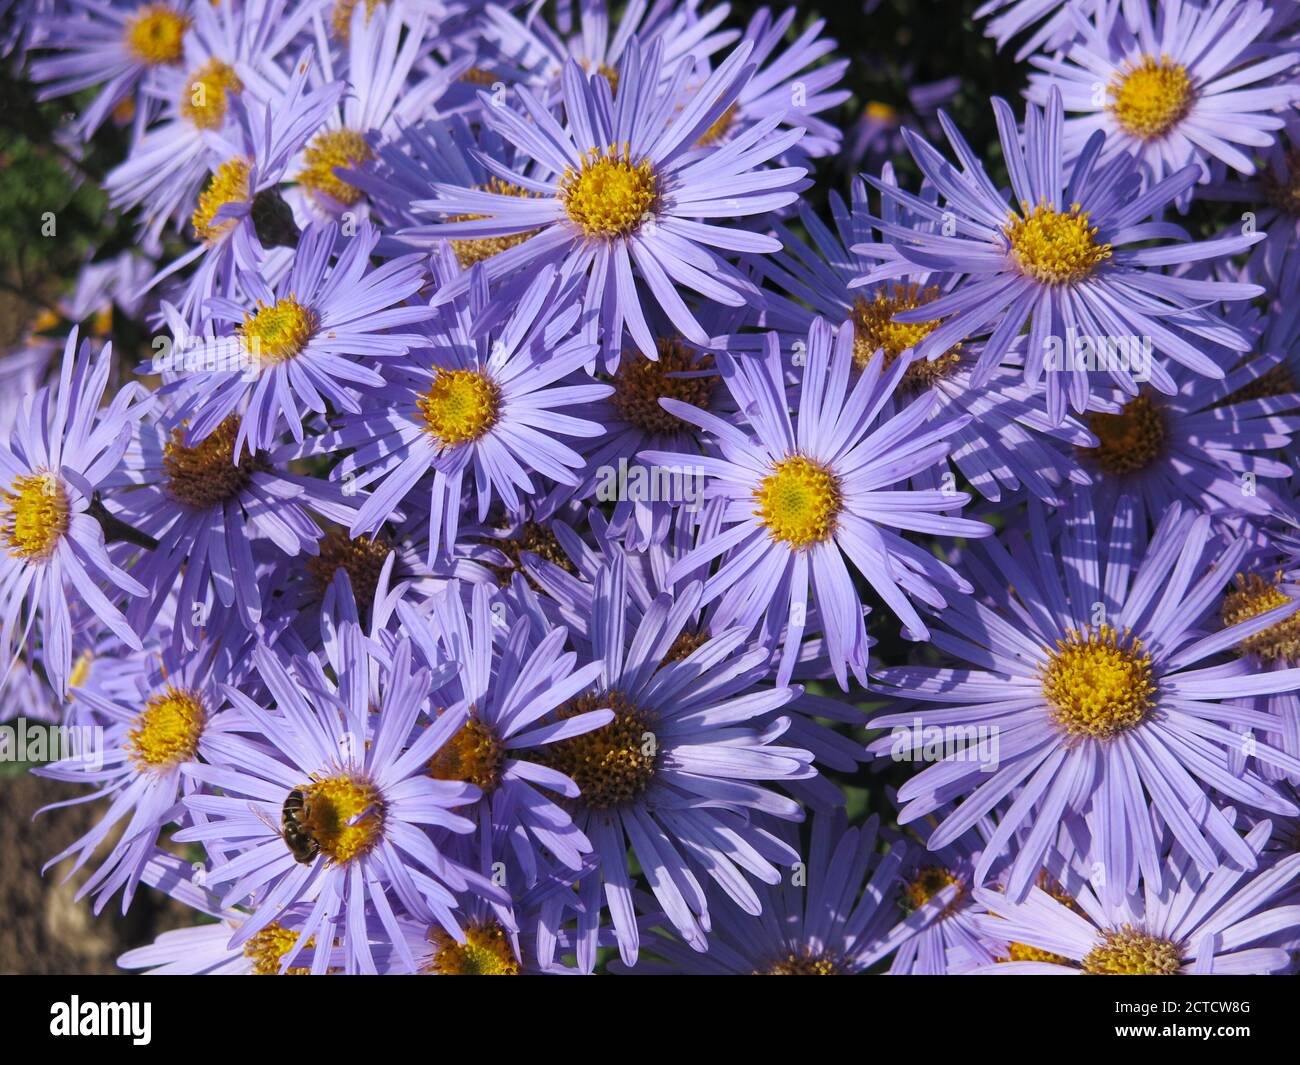 A mass of yellow-centered, vivid blue daisy-like flowers from aster amellus 'King George' provide autumn colour in the border of an English garden. Stock Photo